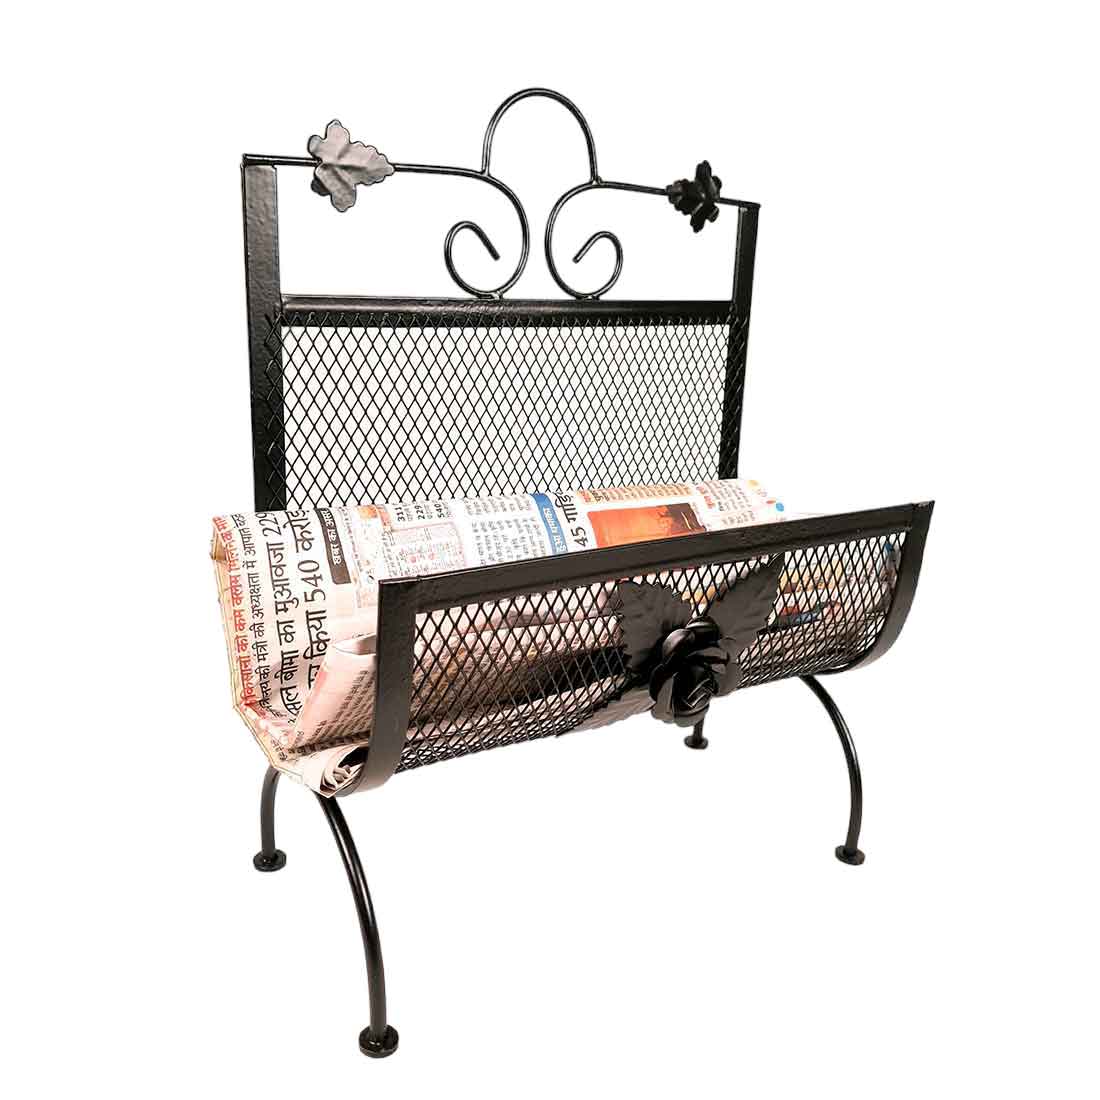 Magazine Holder | Newspaper Stand Cum Organizer - For Home Decor, Living Room, Organising & Gifts - 12 Inch - Apkamart #Style_Pack of 2